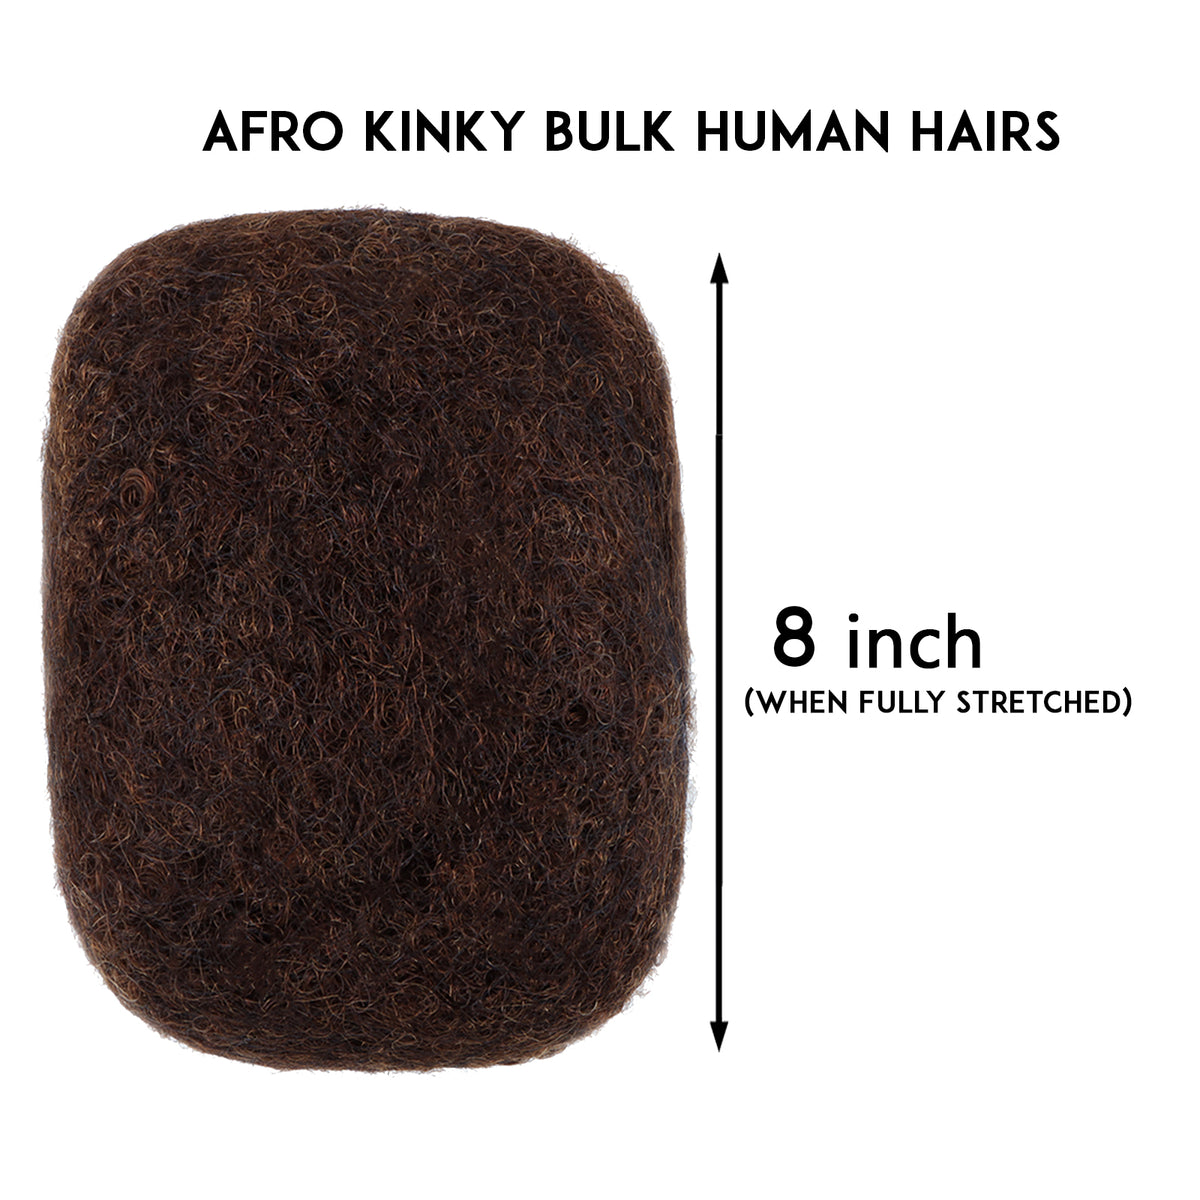 Afro Kinky Human Hairs For Making,Repairing & Bulking Locs 8 Inch Long Afro Kinky Bulk Human Hair For Dreadlock Extensions 100% Natural Afro Hairs For Twisting & Braiding 29g/1Oz (#4 / Brown, 8 Inch)